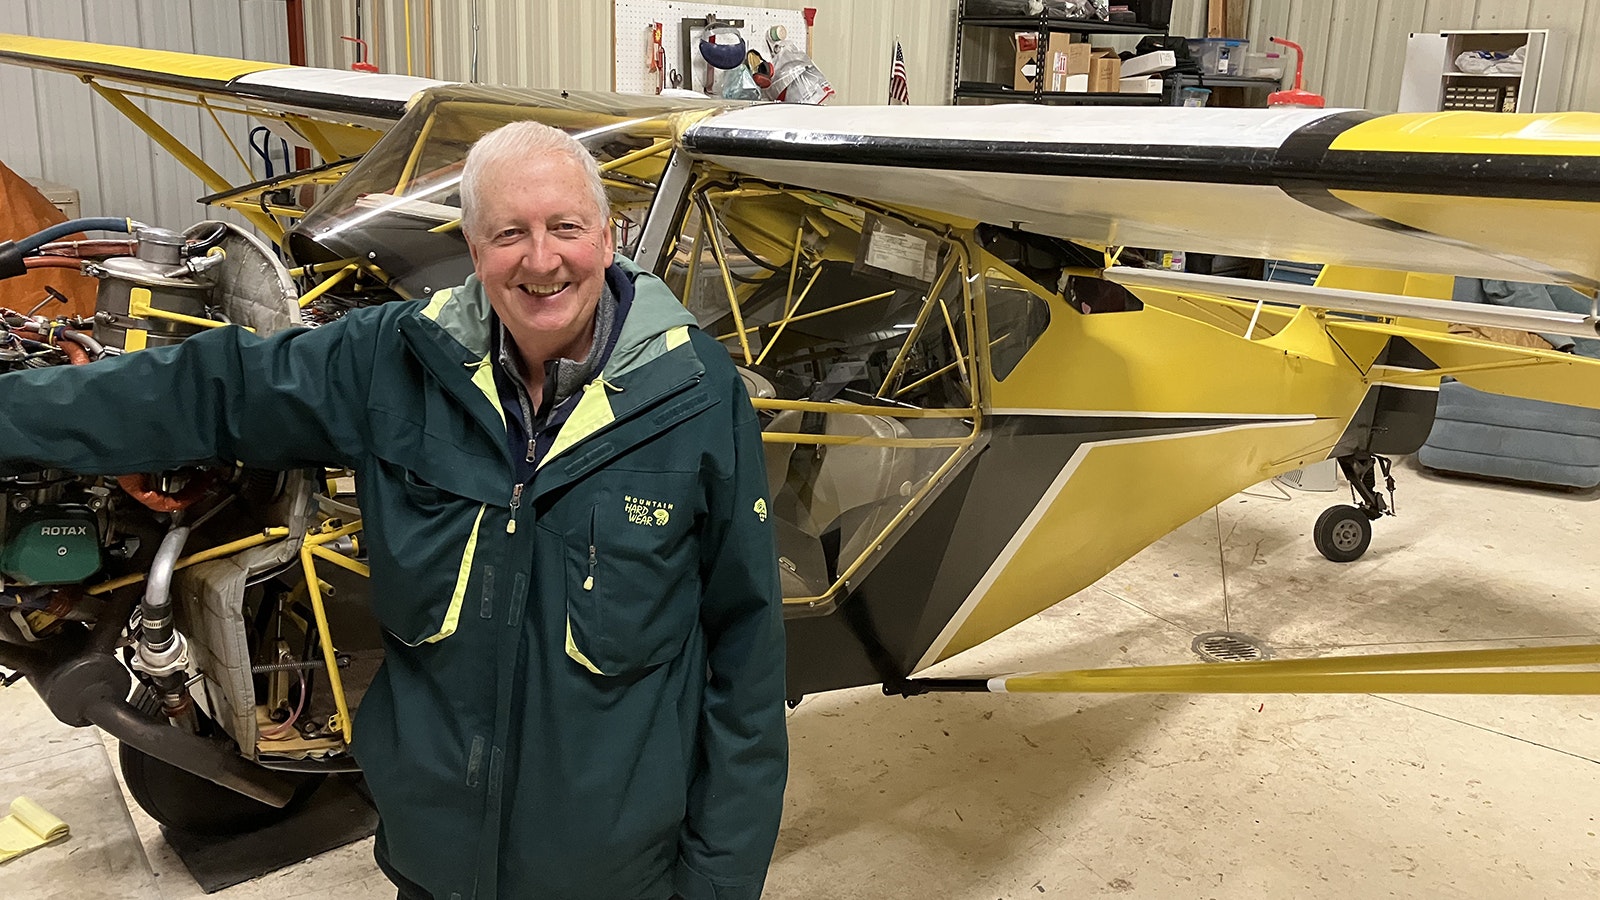 Growing up with his crop-duster father taught Dallas a few things about airplane mechanics. As an aeronautical engineer graduate, he learned a lot more. He still enjoys working on his airplane.